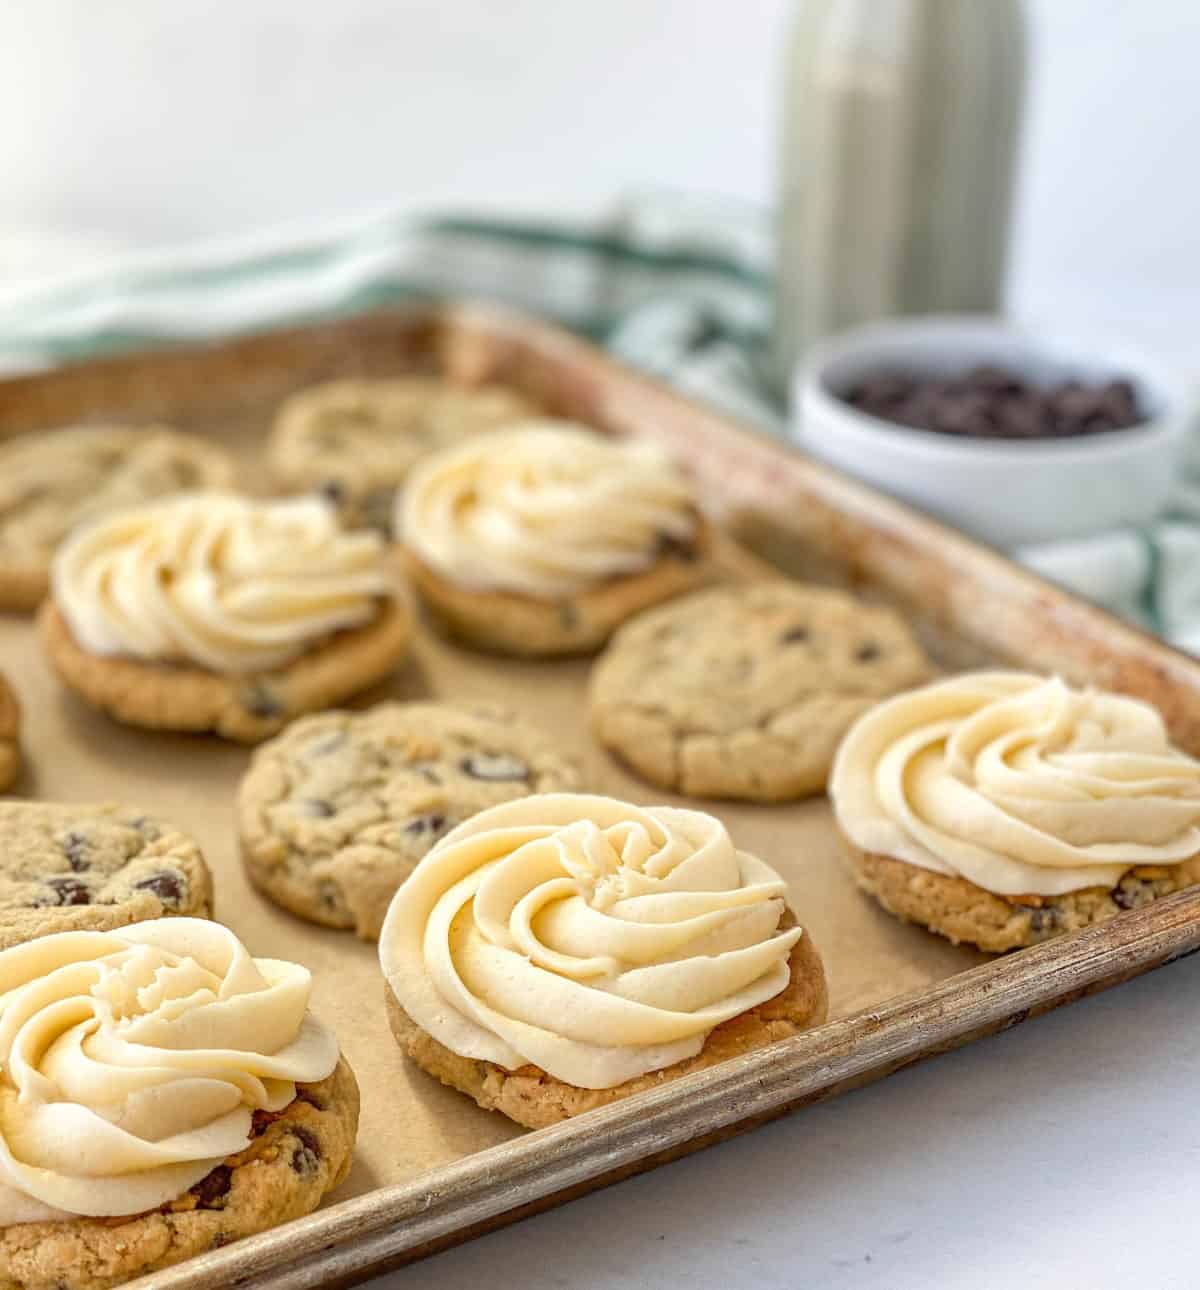 Bailey's Chocolate Chip Cookies topped with Bailey's buttercream on a baking sheet.